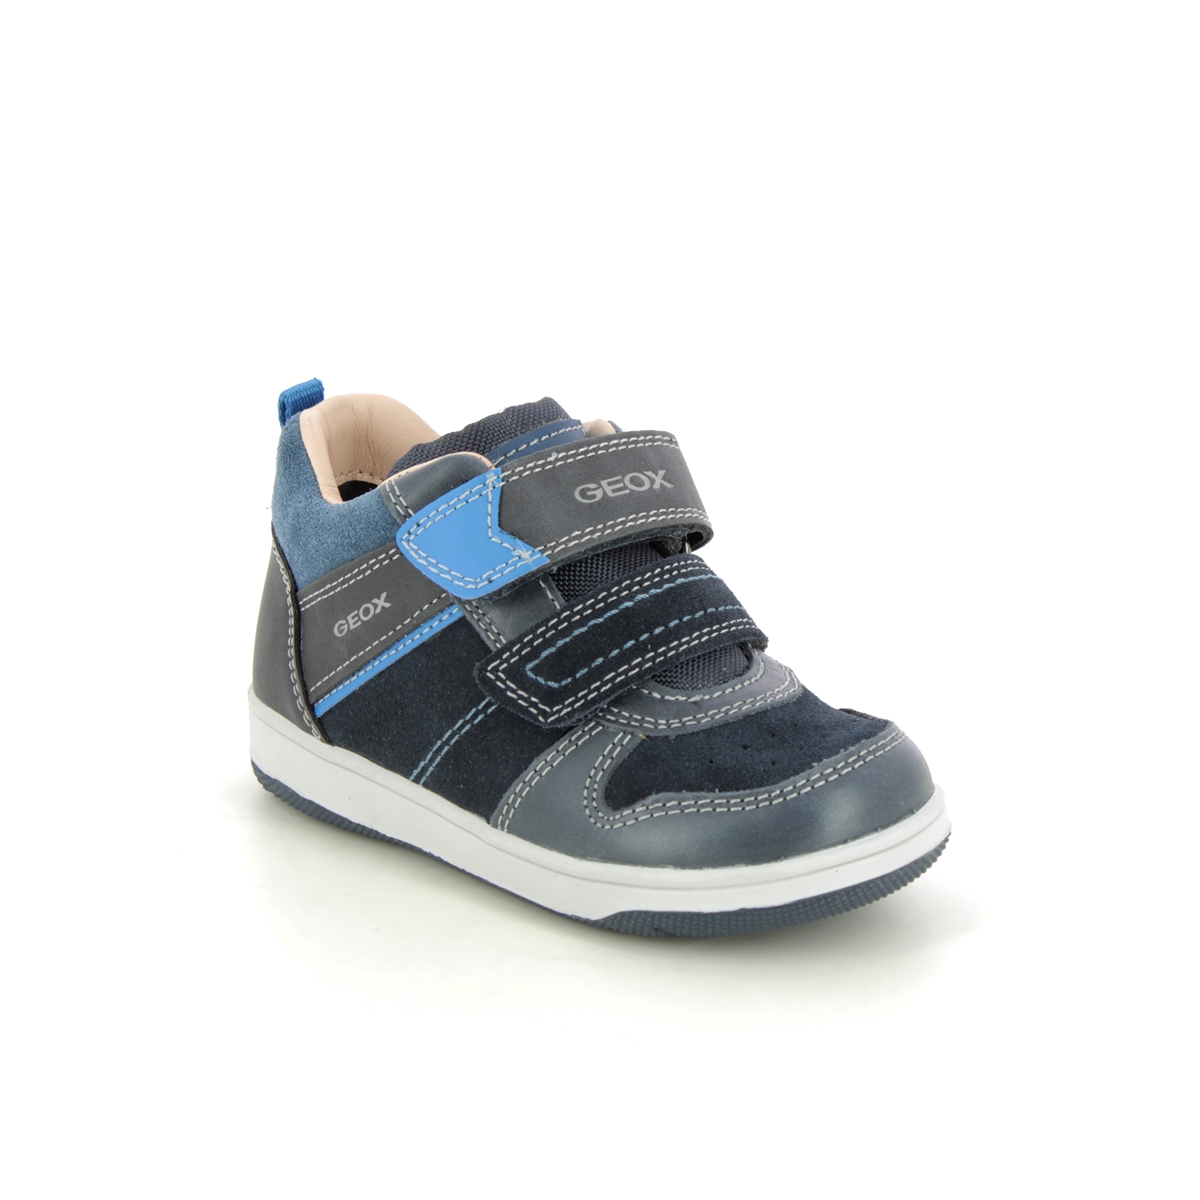 Geox - New Flick B 2V (Navy Leather) B161La-C4231 In Size 24 In Plain Navy Leather For kids